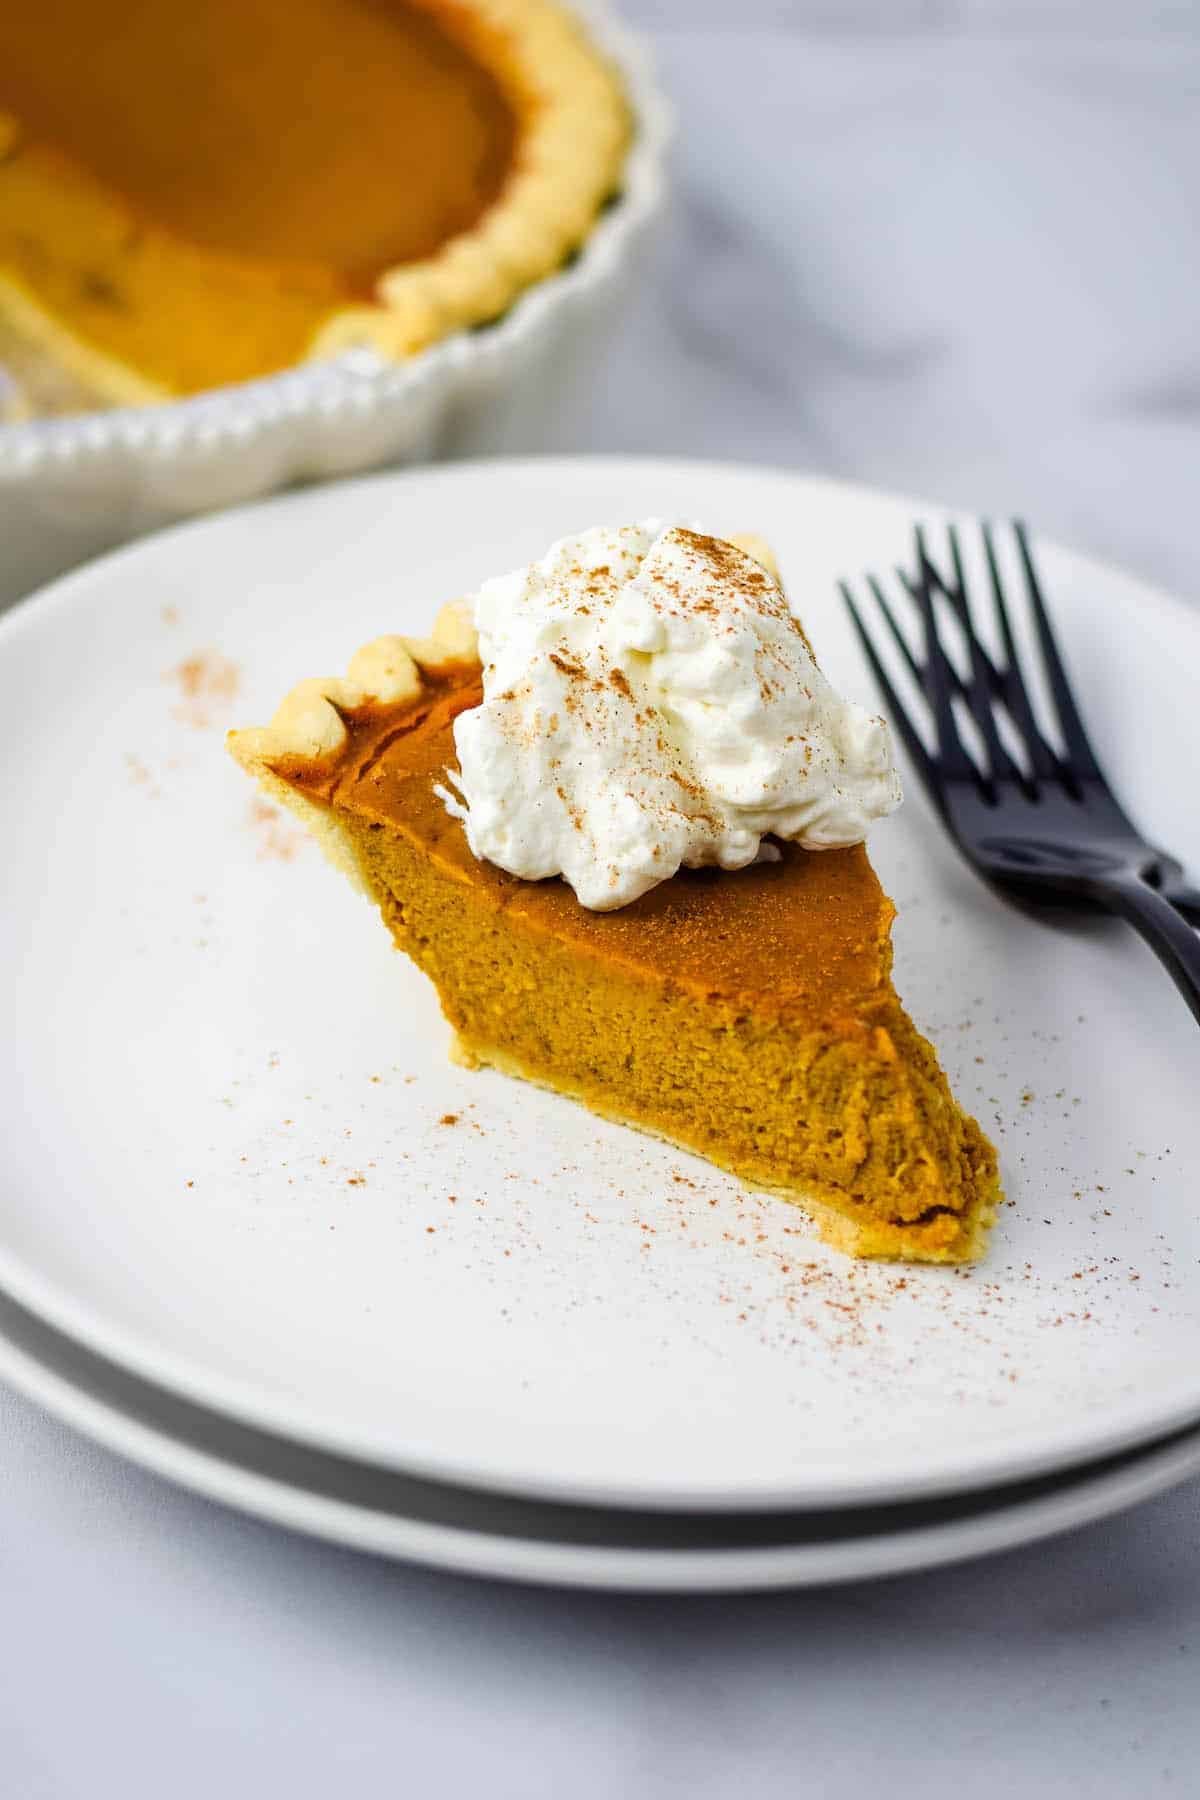 homemade whipped cream on top of the pumpkin pie. the pie is on top of a stack of white plates with 2 black forks resting beside it.